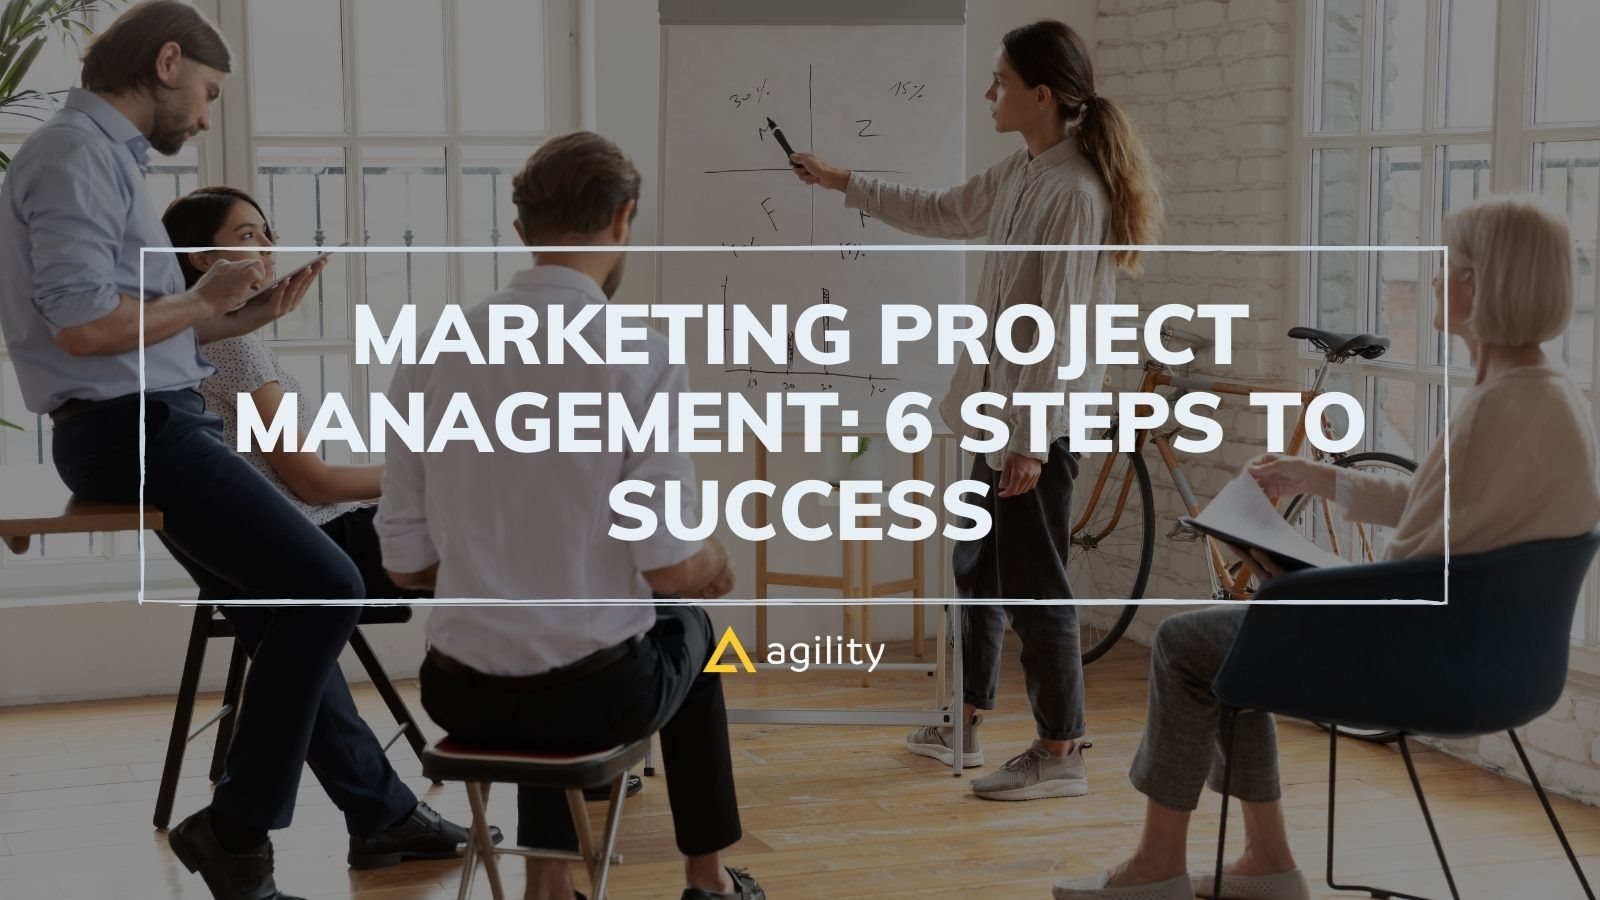 Marketing Project Management: 6 Steps to Success